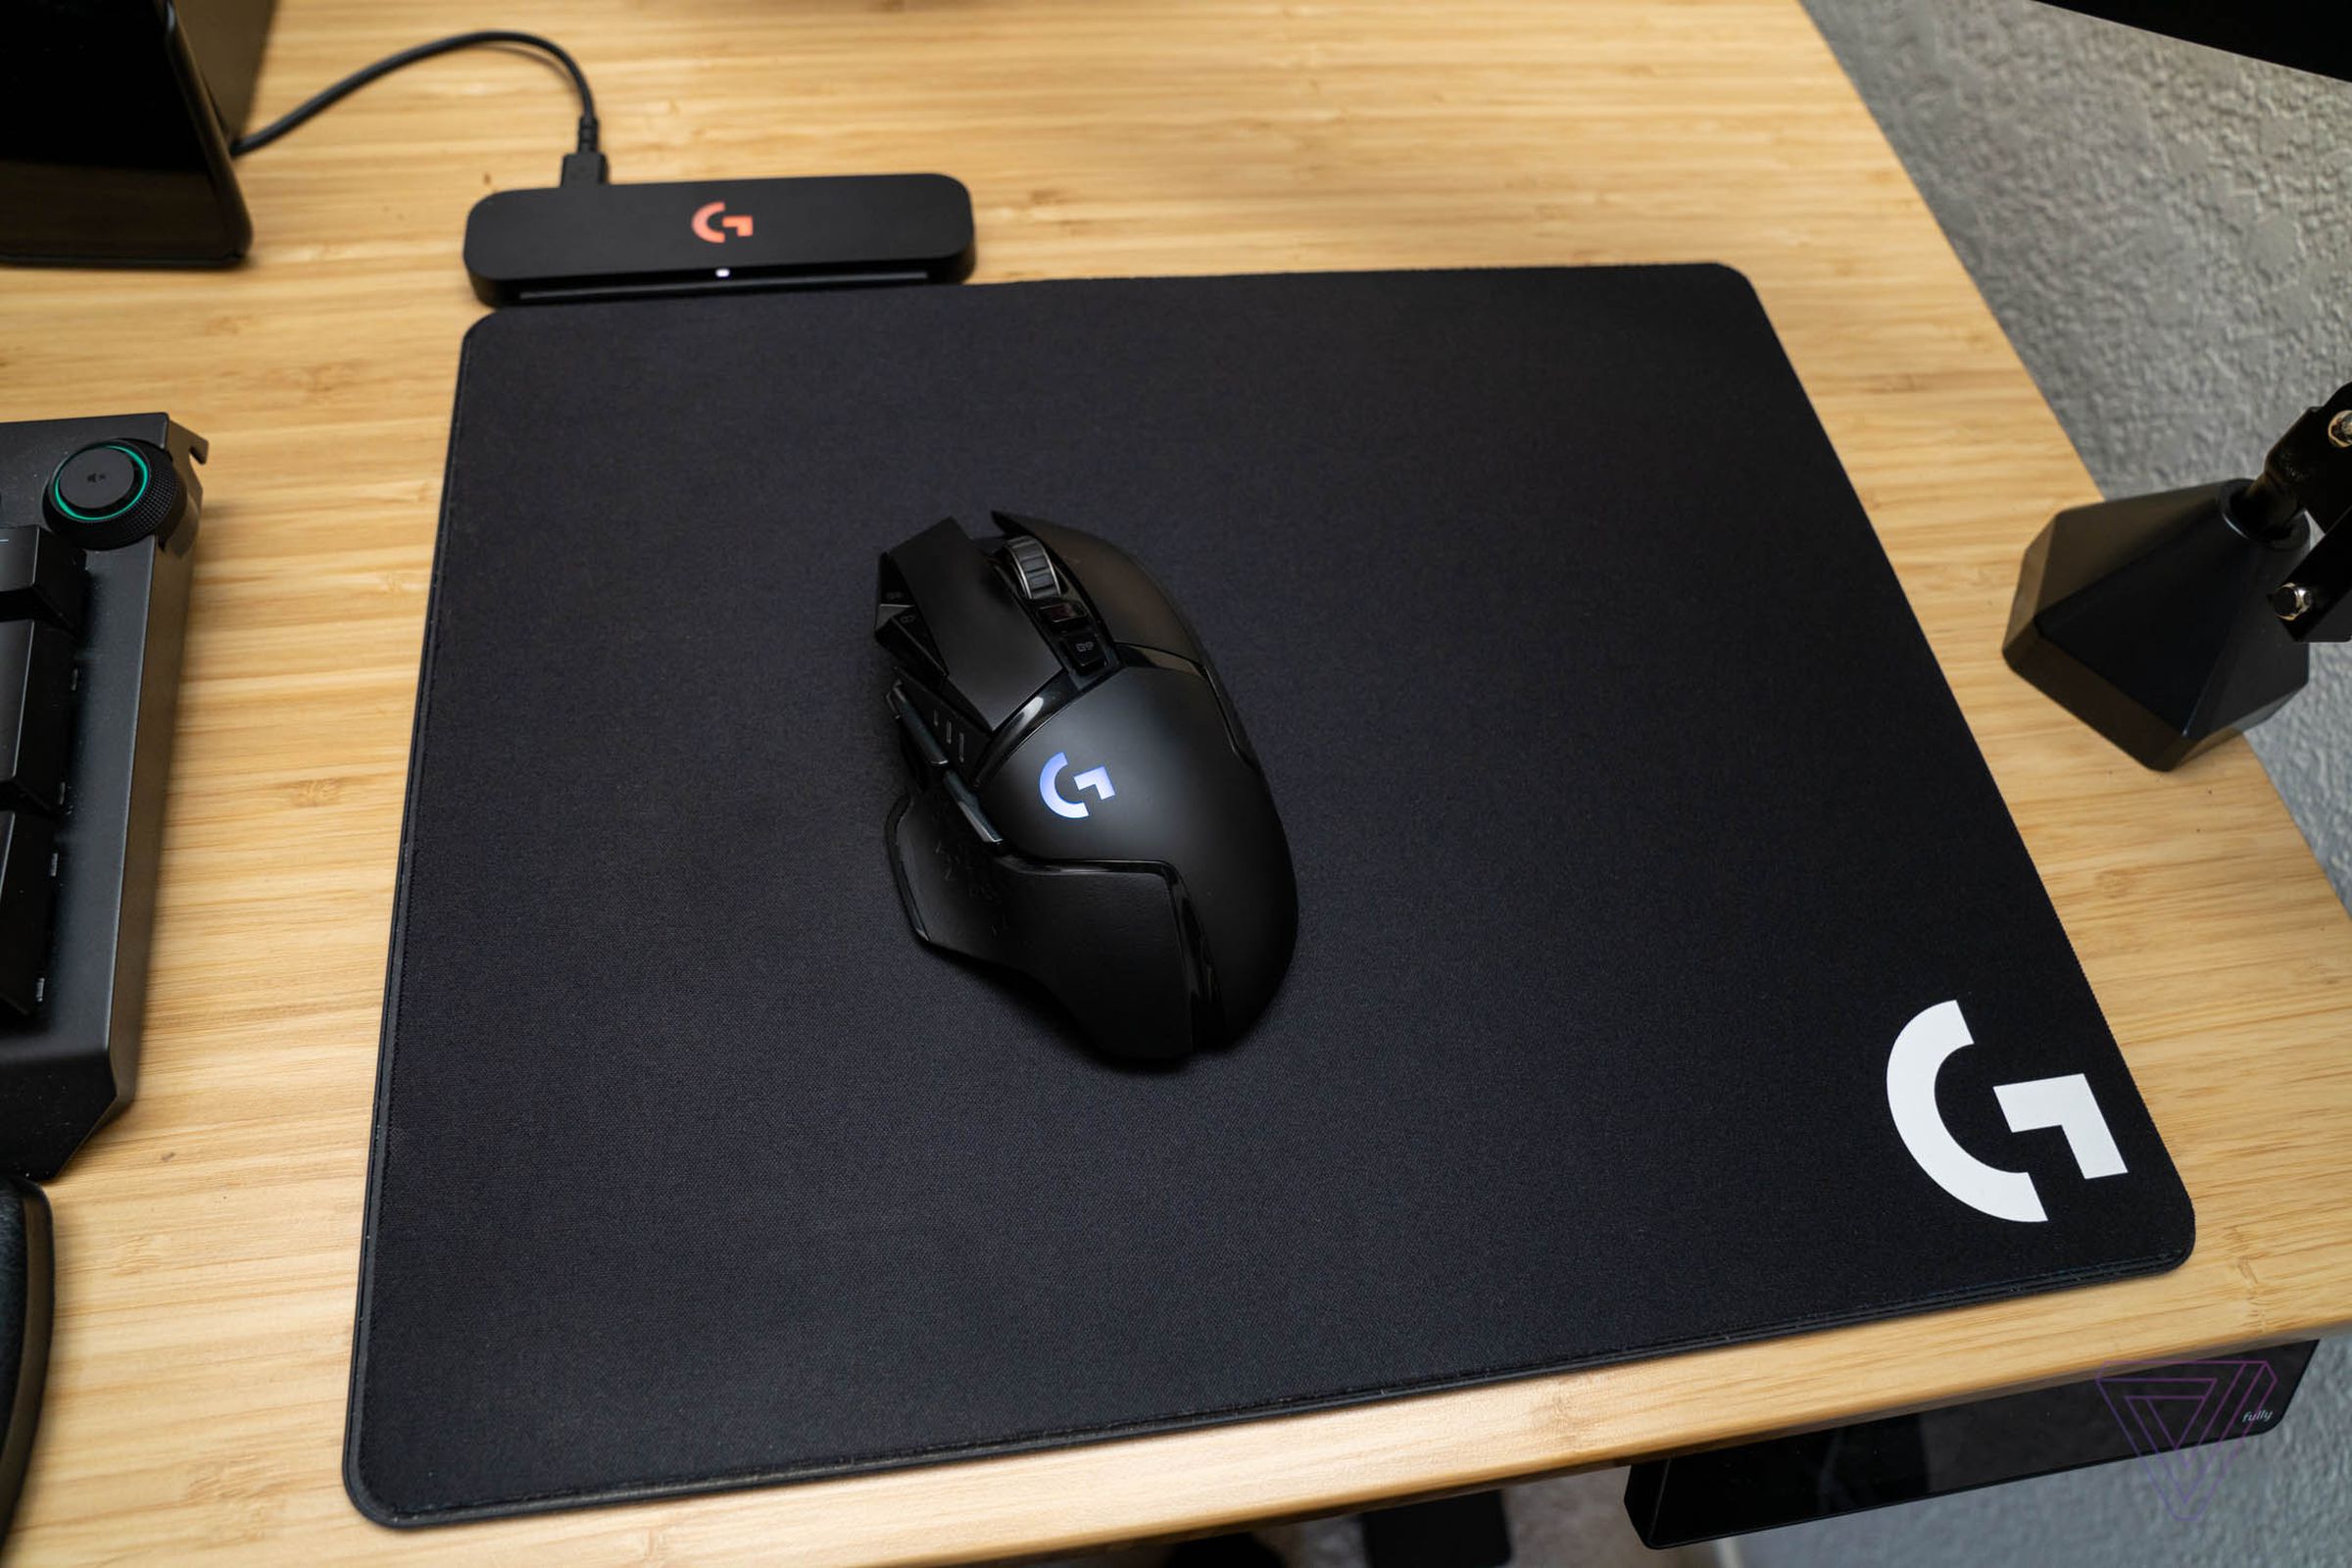 Some users have DIY’d the Powerplay into larger mousepads, but this is the only size Logitech sells.